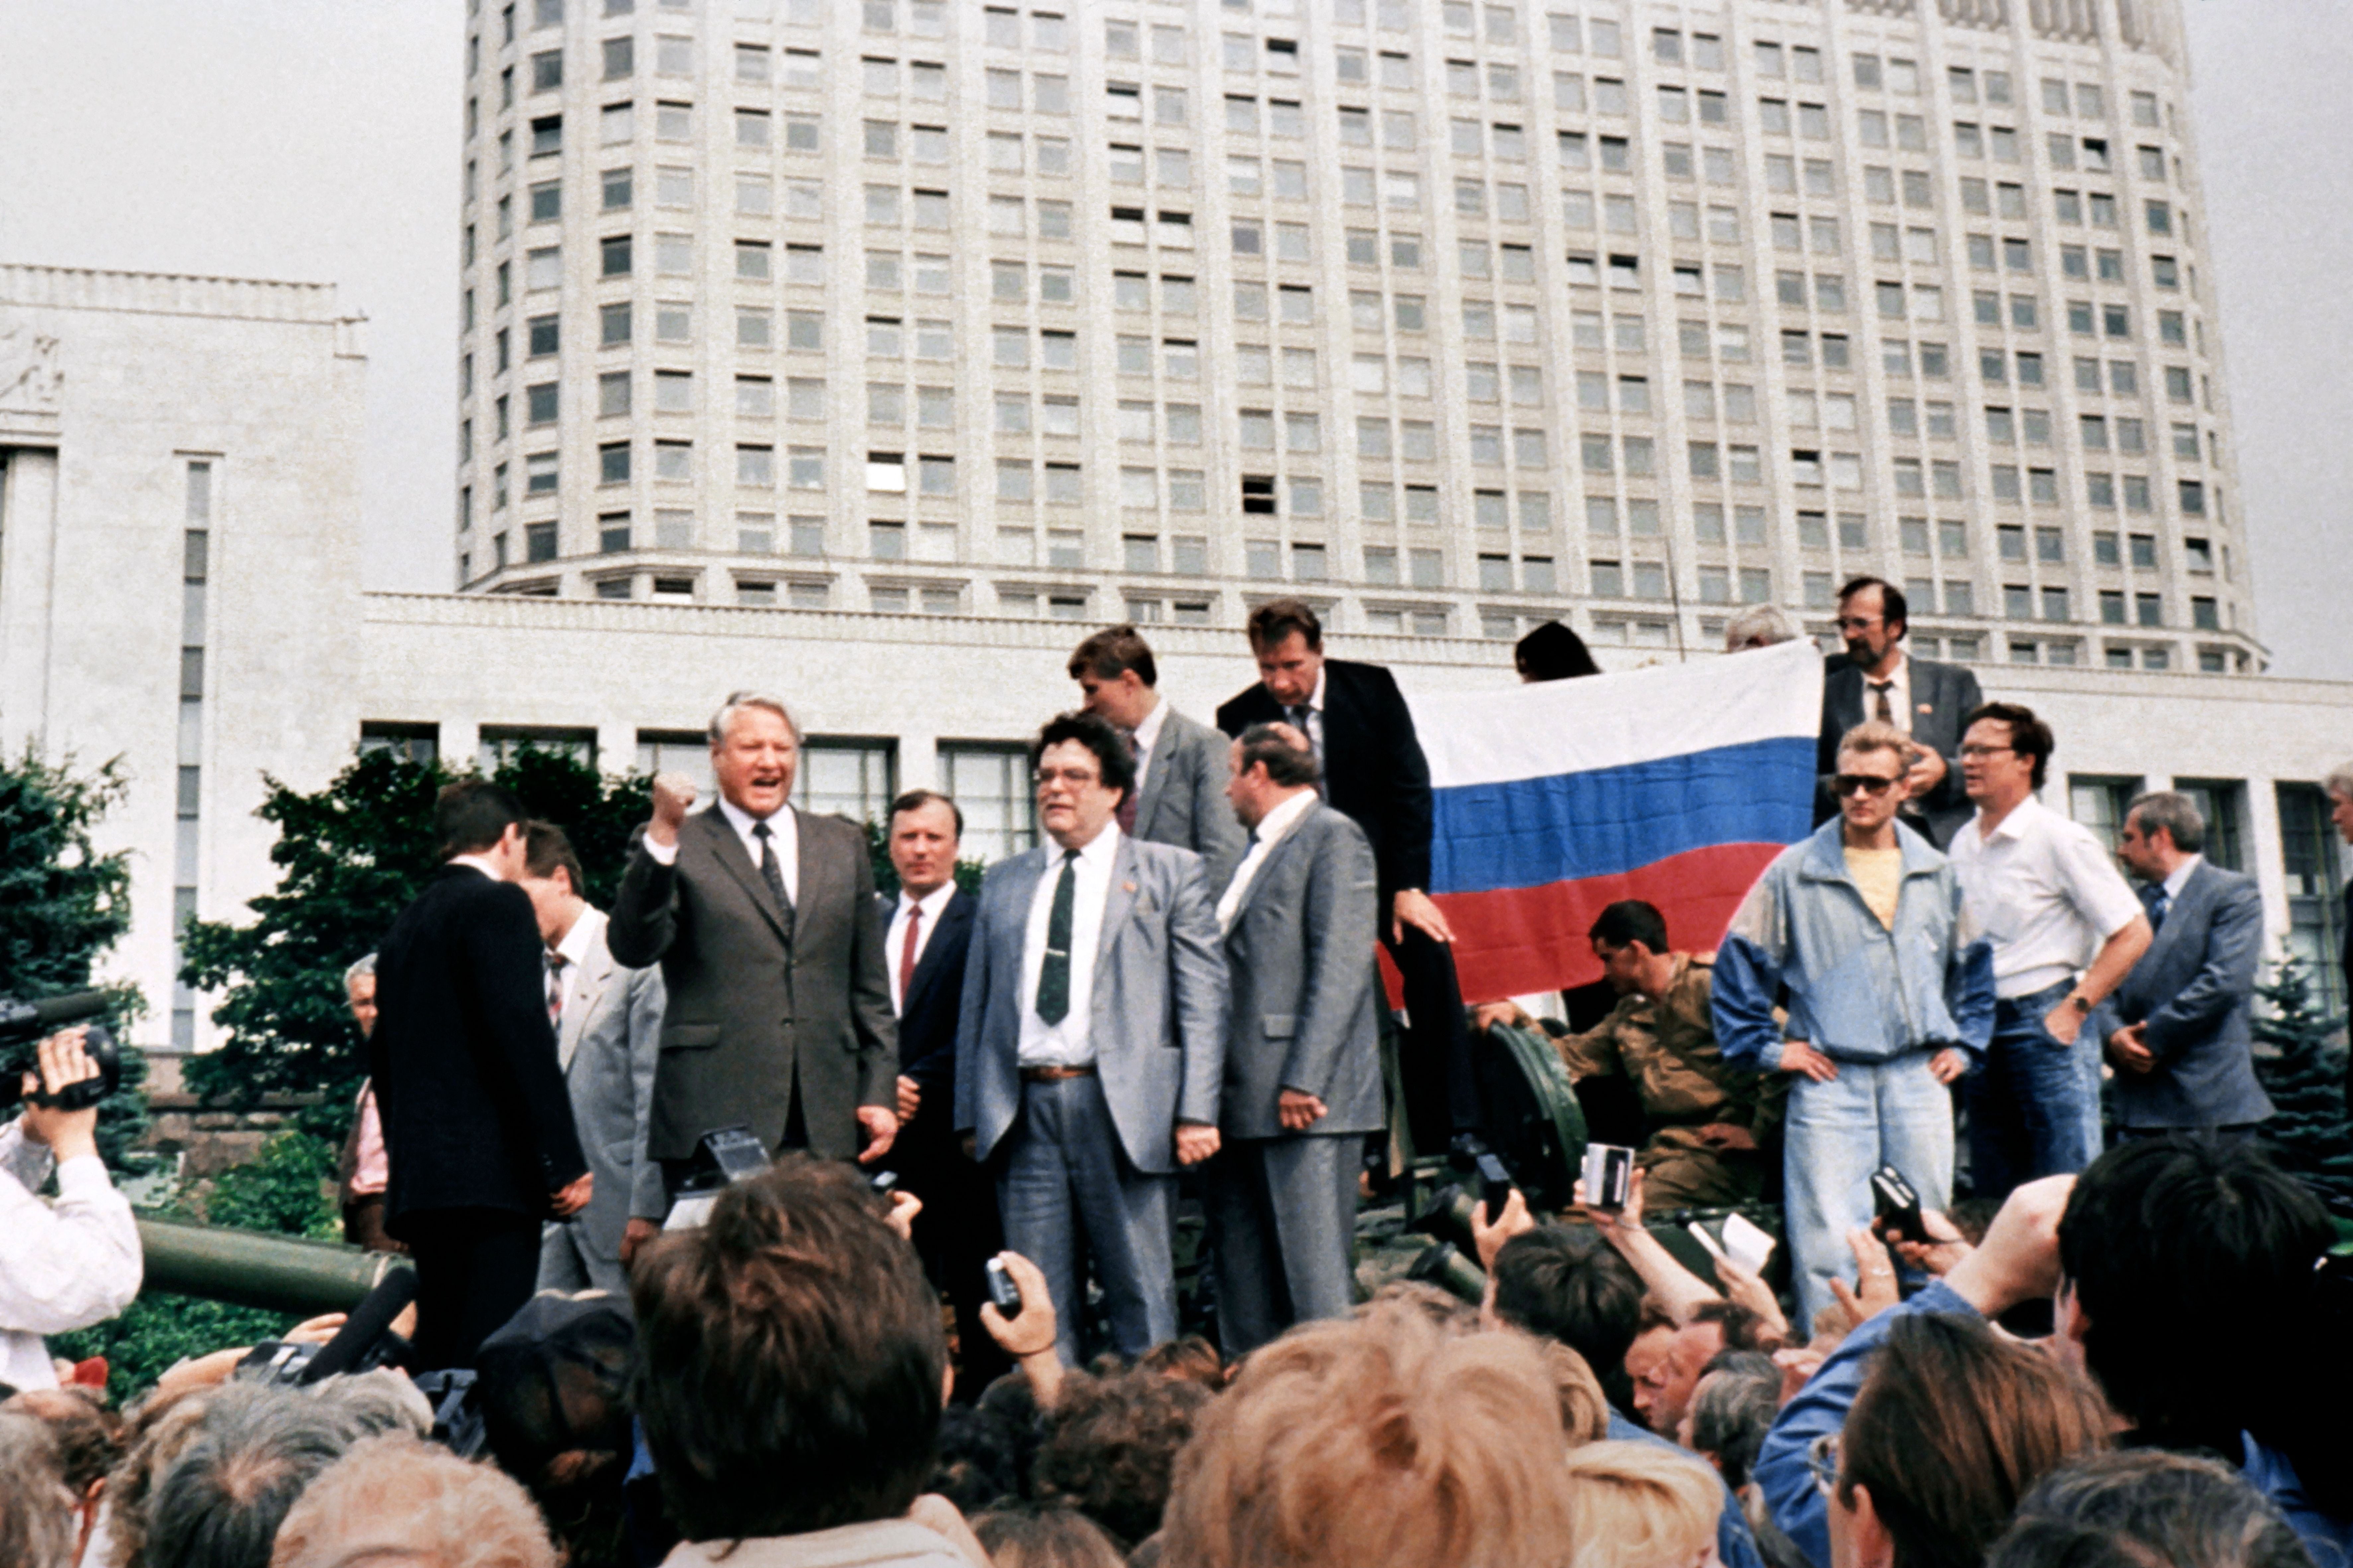 Yeltsin’s finest hour: the Russian president climbs on top of a tank and speaks to the people